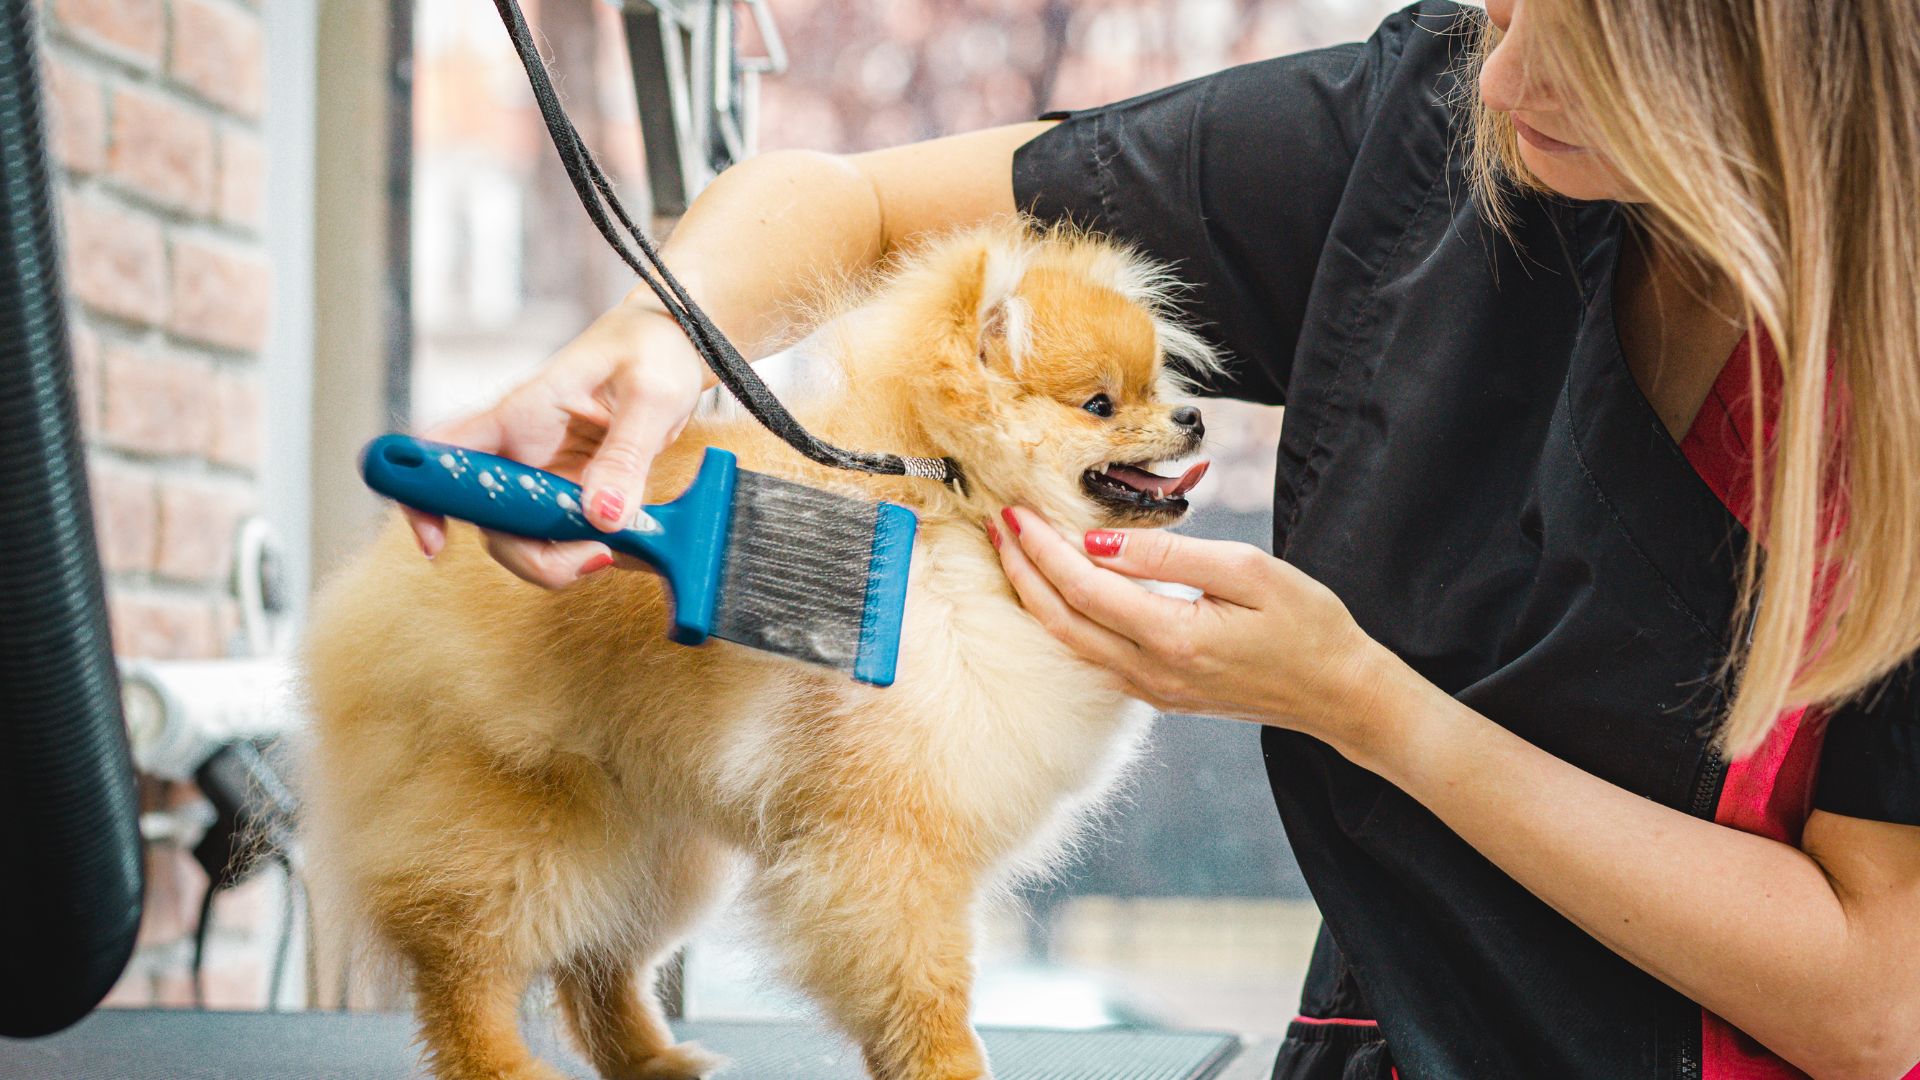 How to start a mobile dog grooming business